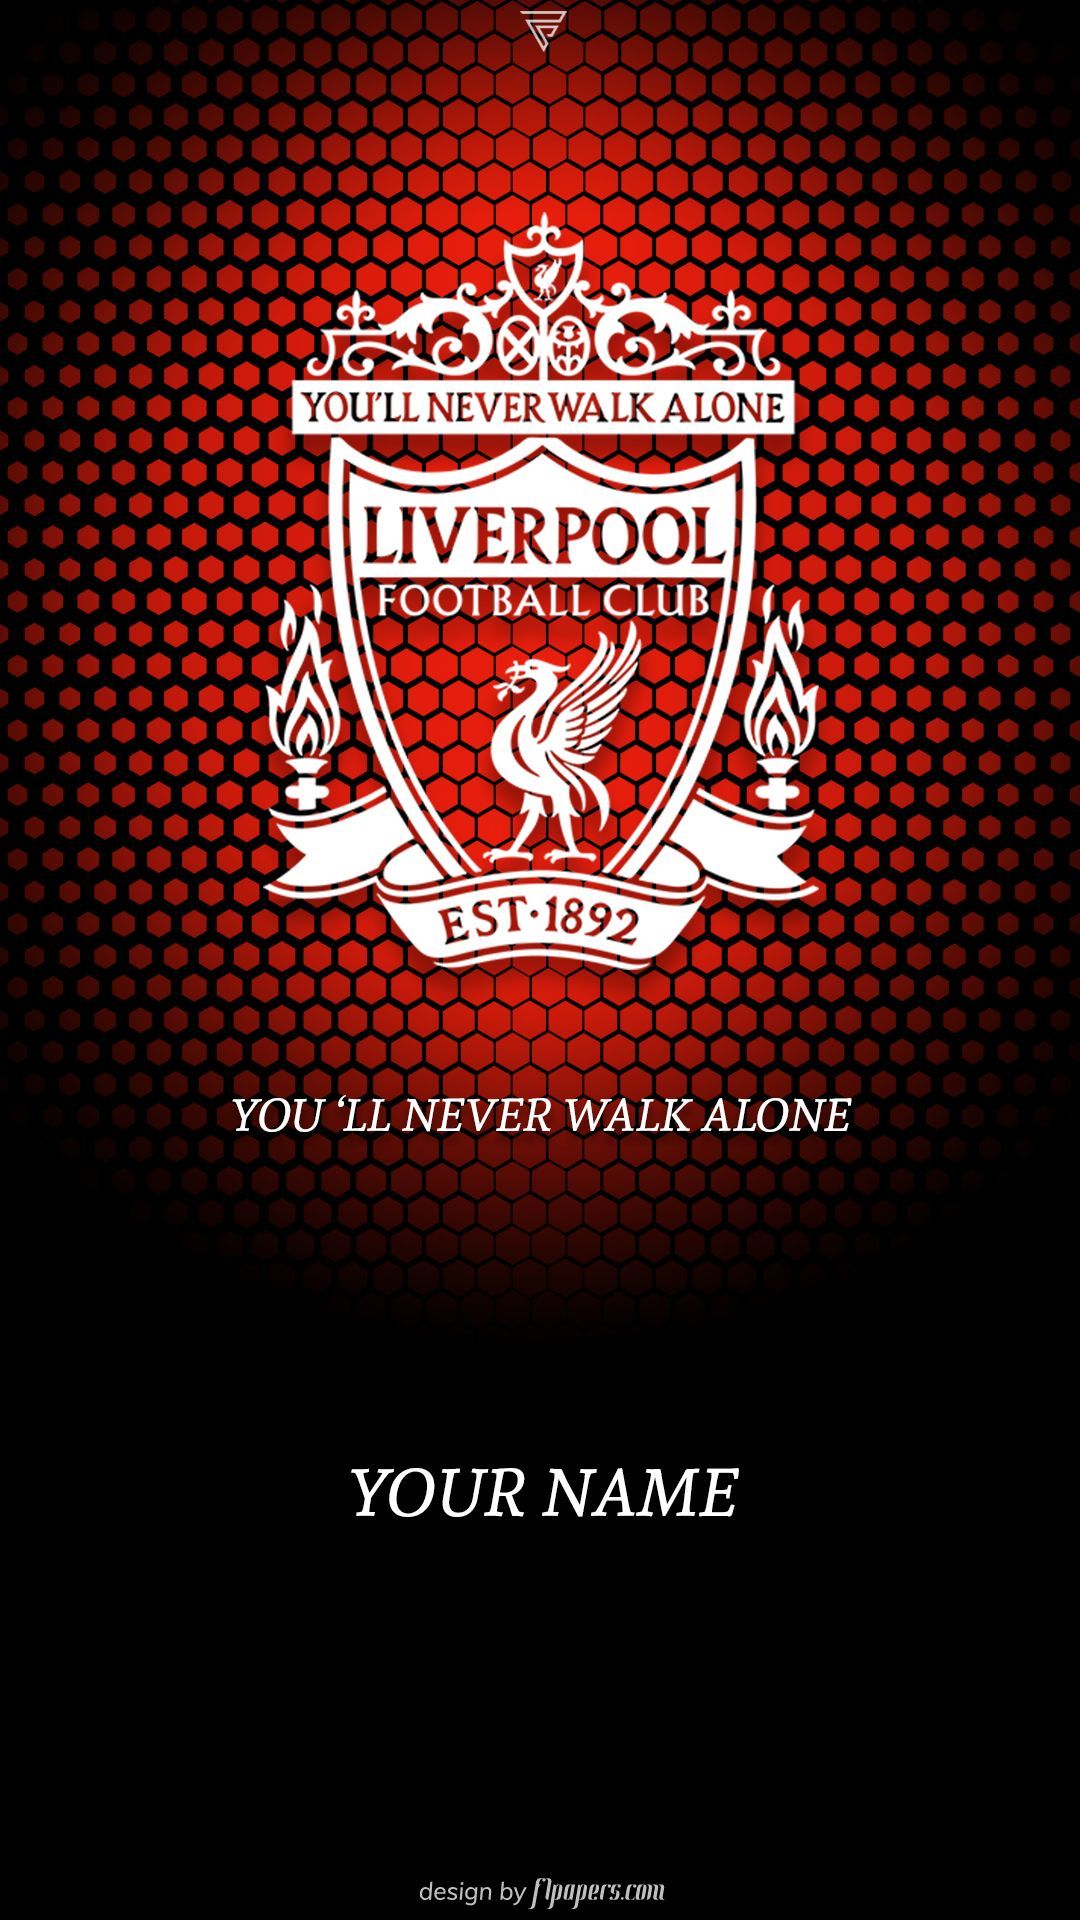 Pin on liverpool